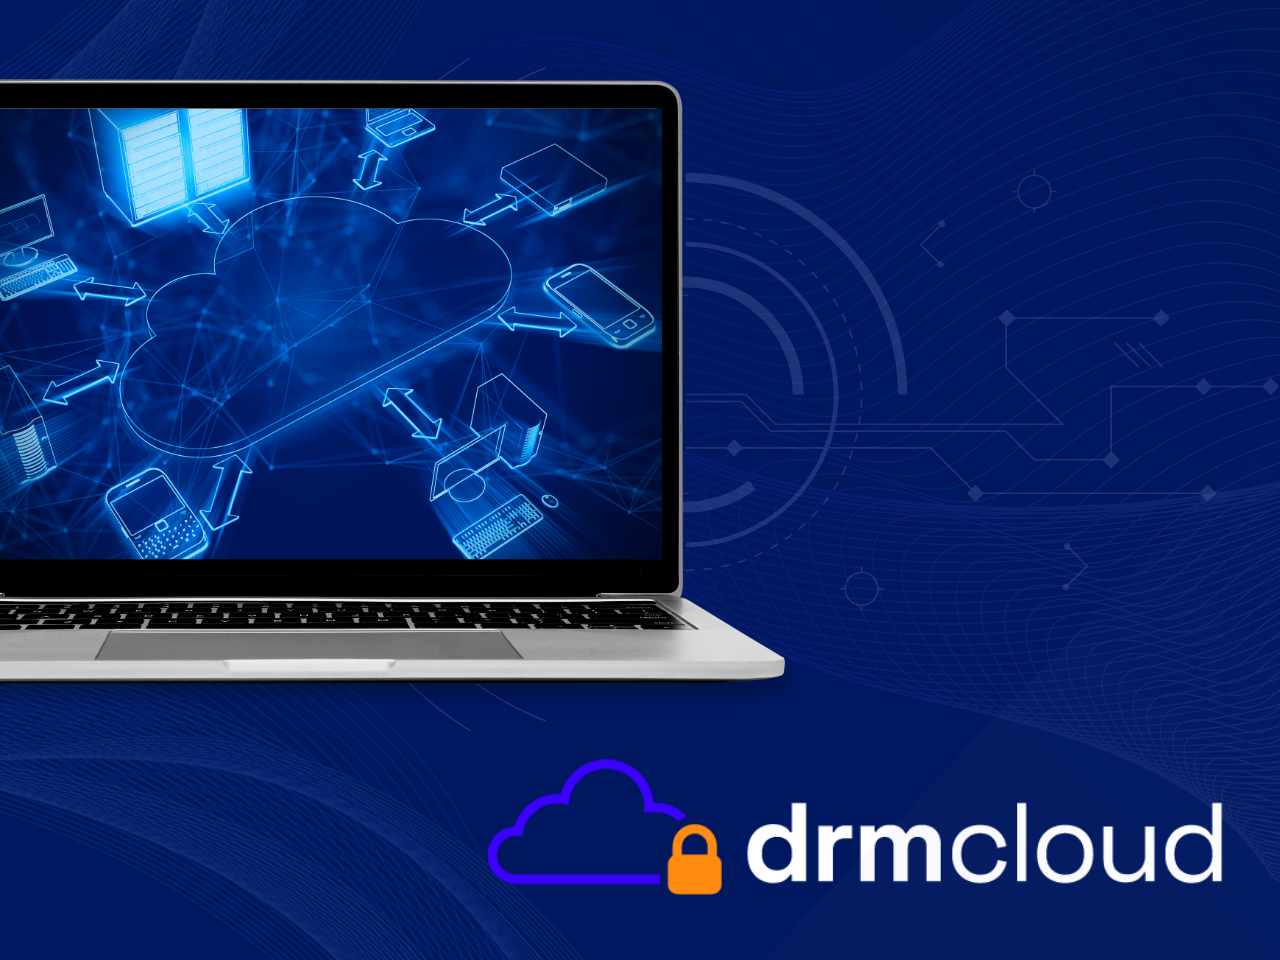 the image shows laptop screen with an image of a cloud sending information to different devices. There is Cloud DRM logo in the bottom right corner.